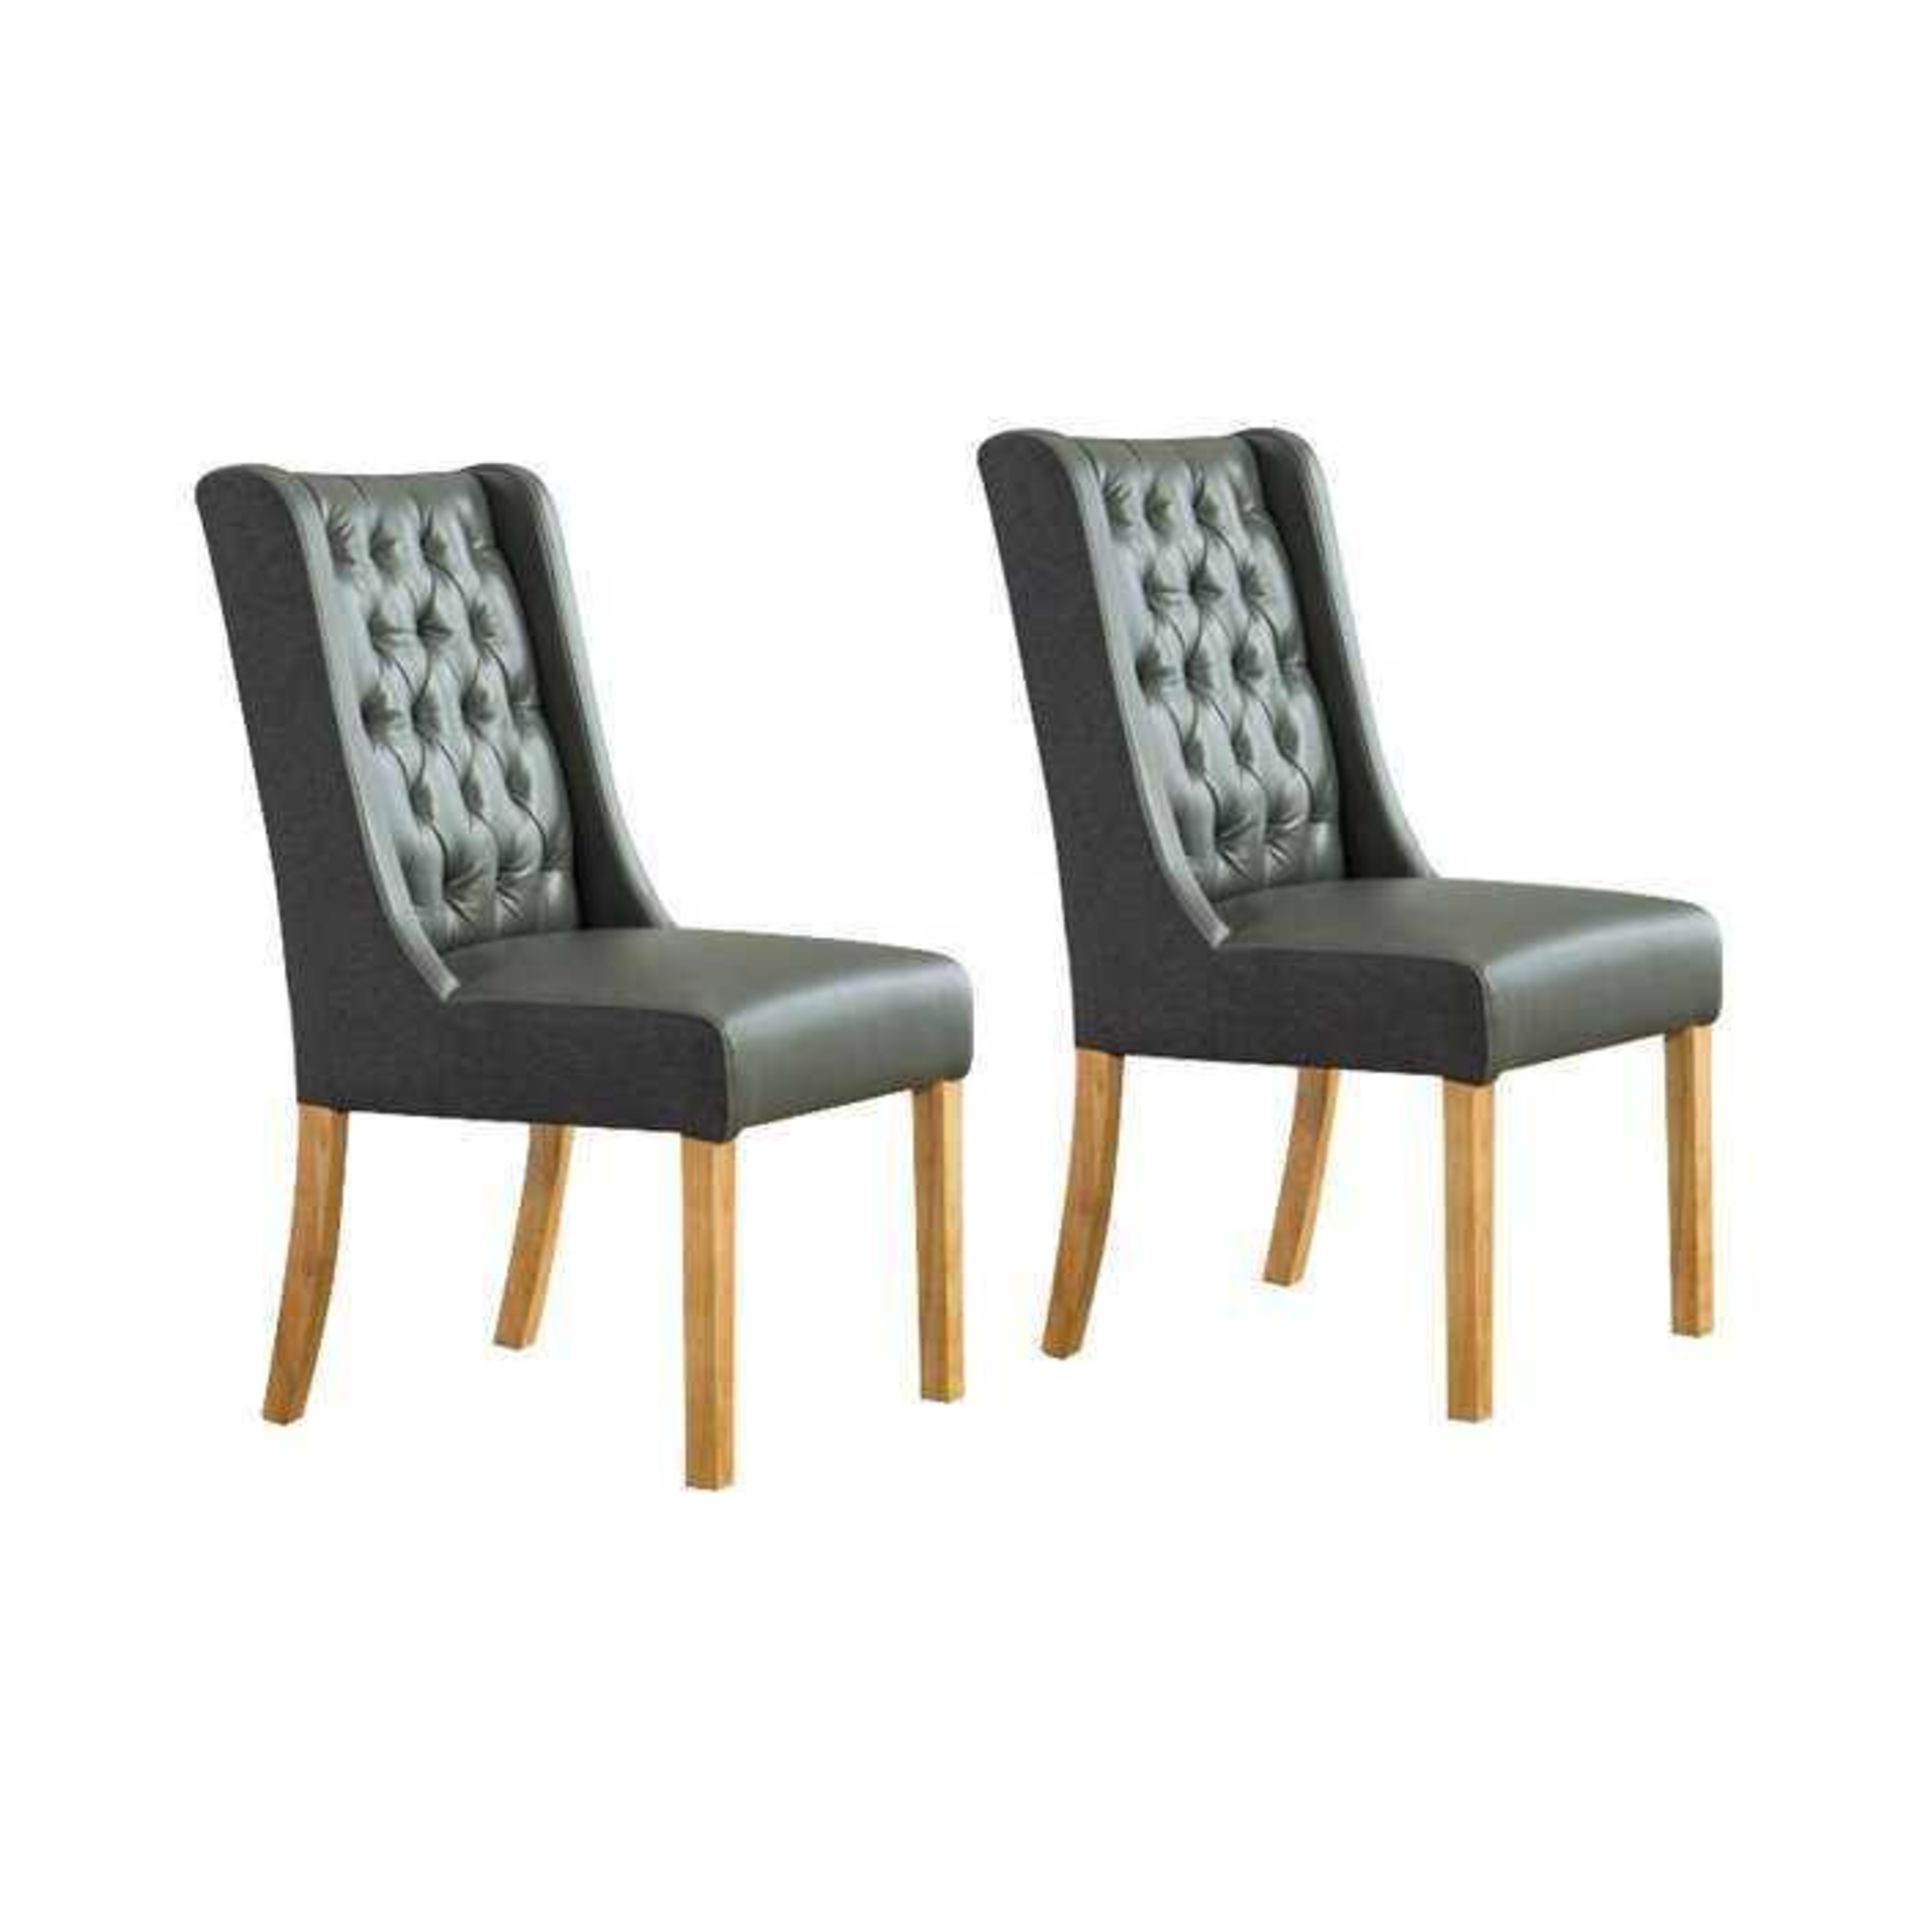 Rrp £260 Marlow Dining Chairs X2